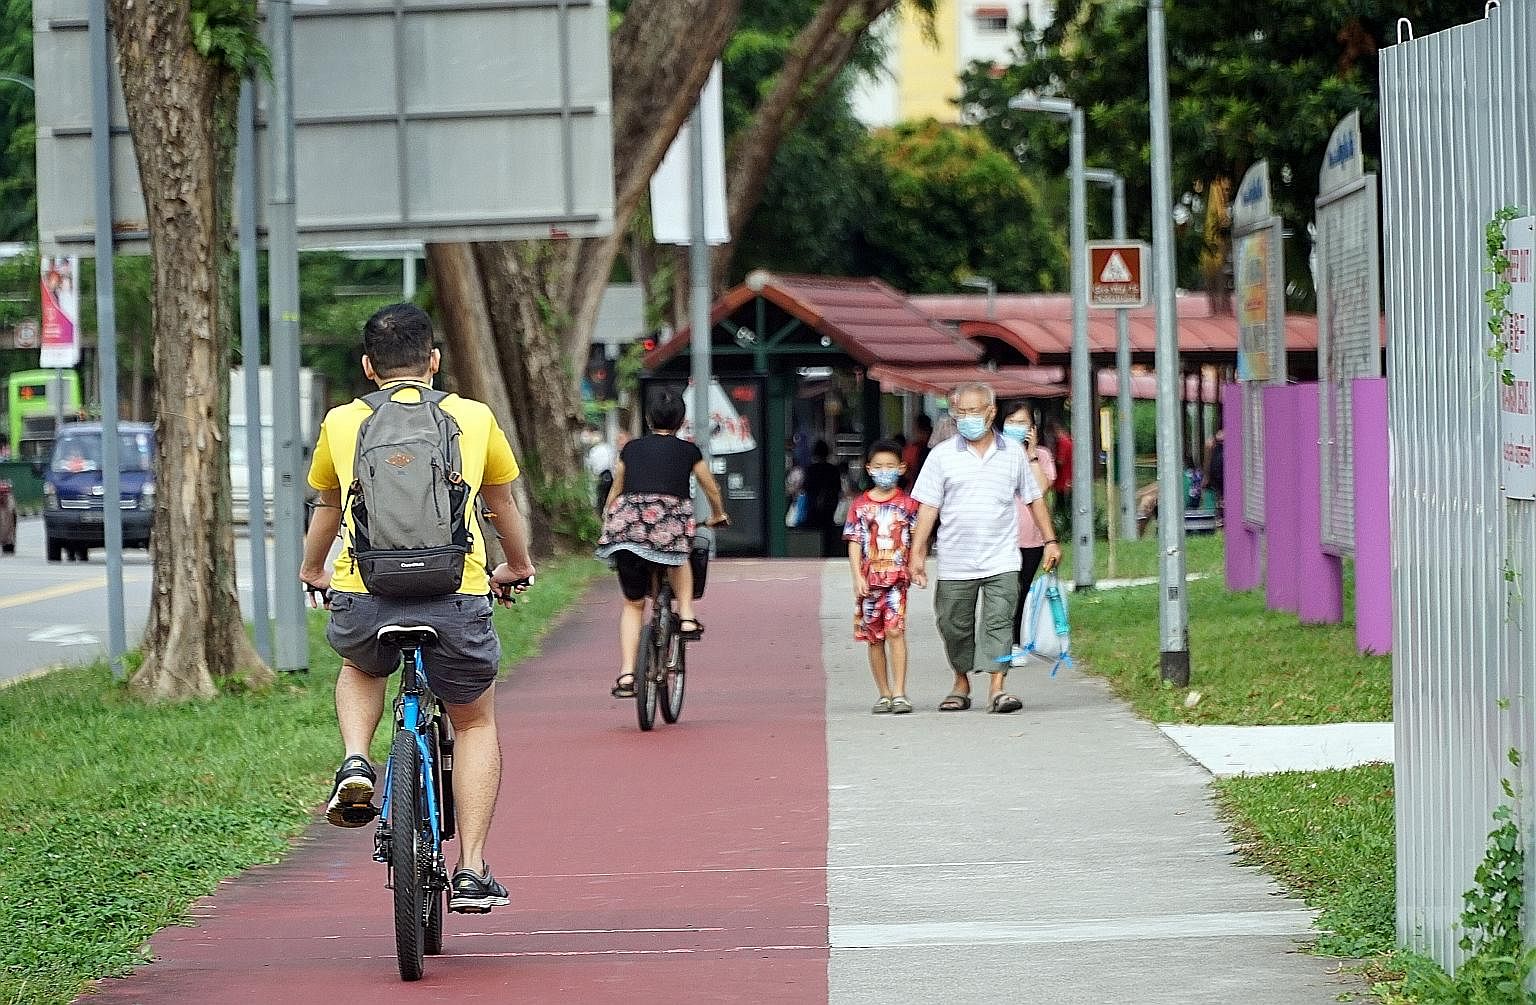 Cyclists in Ang Mo Kio earlier this month. Transport Minister Ong Ye Kung said yesterday the reduced traffic and new travel patterns created by Covid-19 have opened a "window of opportunity to reimagine" the road infrastructure, and certain underused